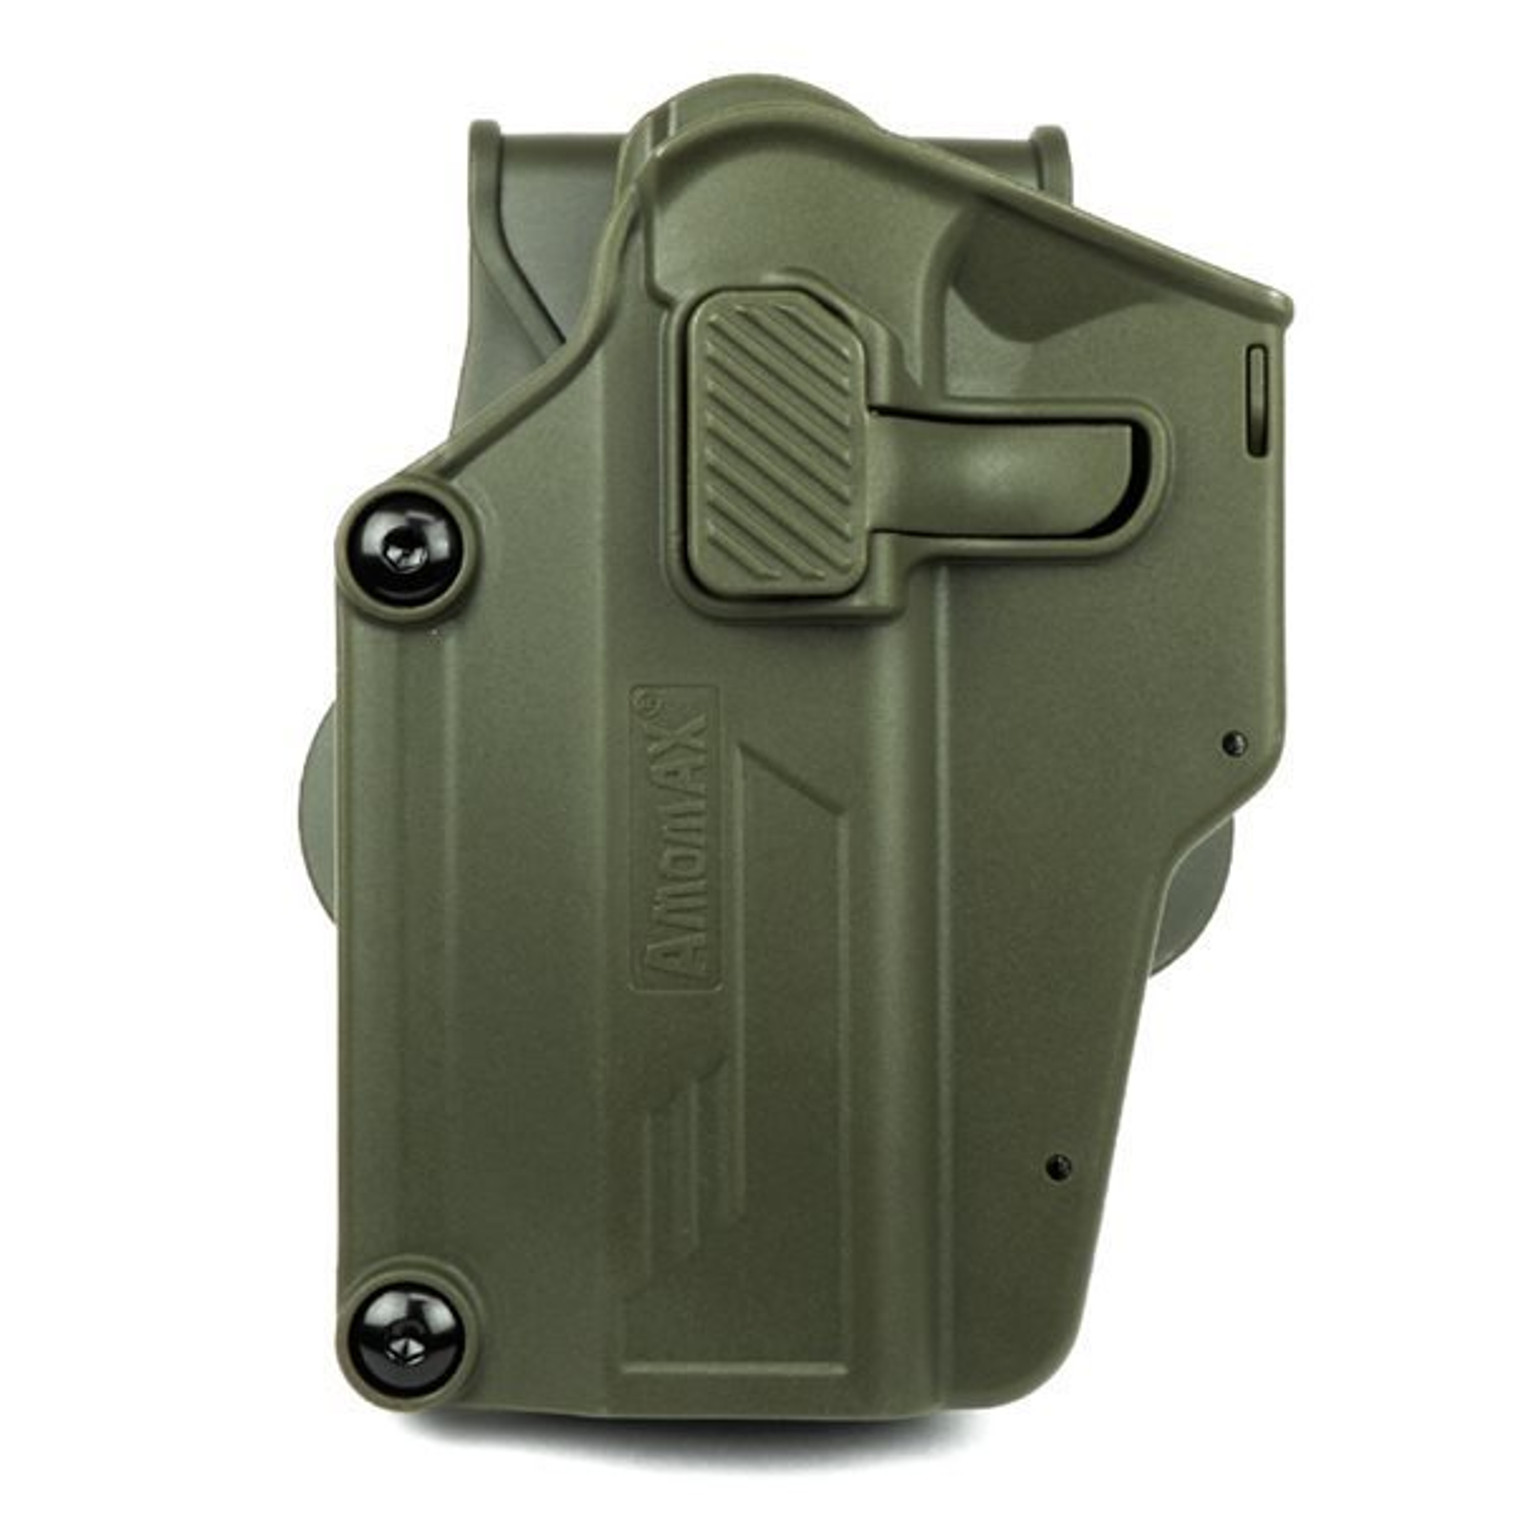 Per-Fit™️ Multi fit Holster, fits 200+ guns - LEFT - OD Green - Paddle Mount